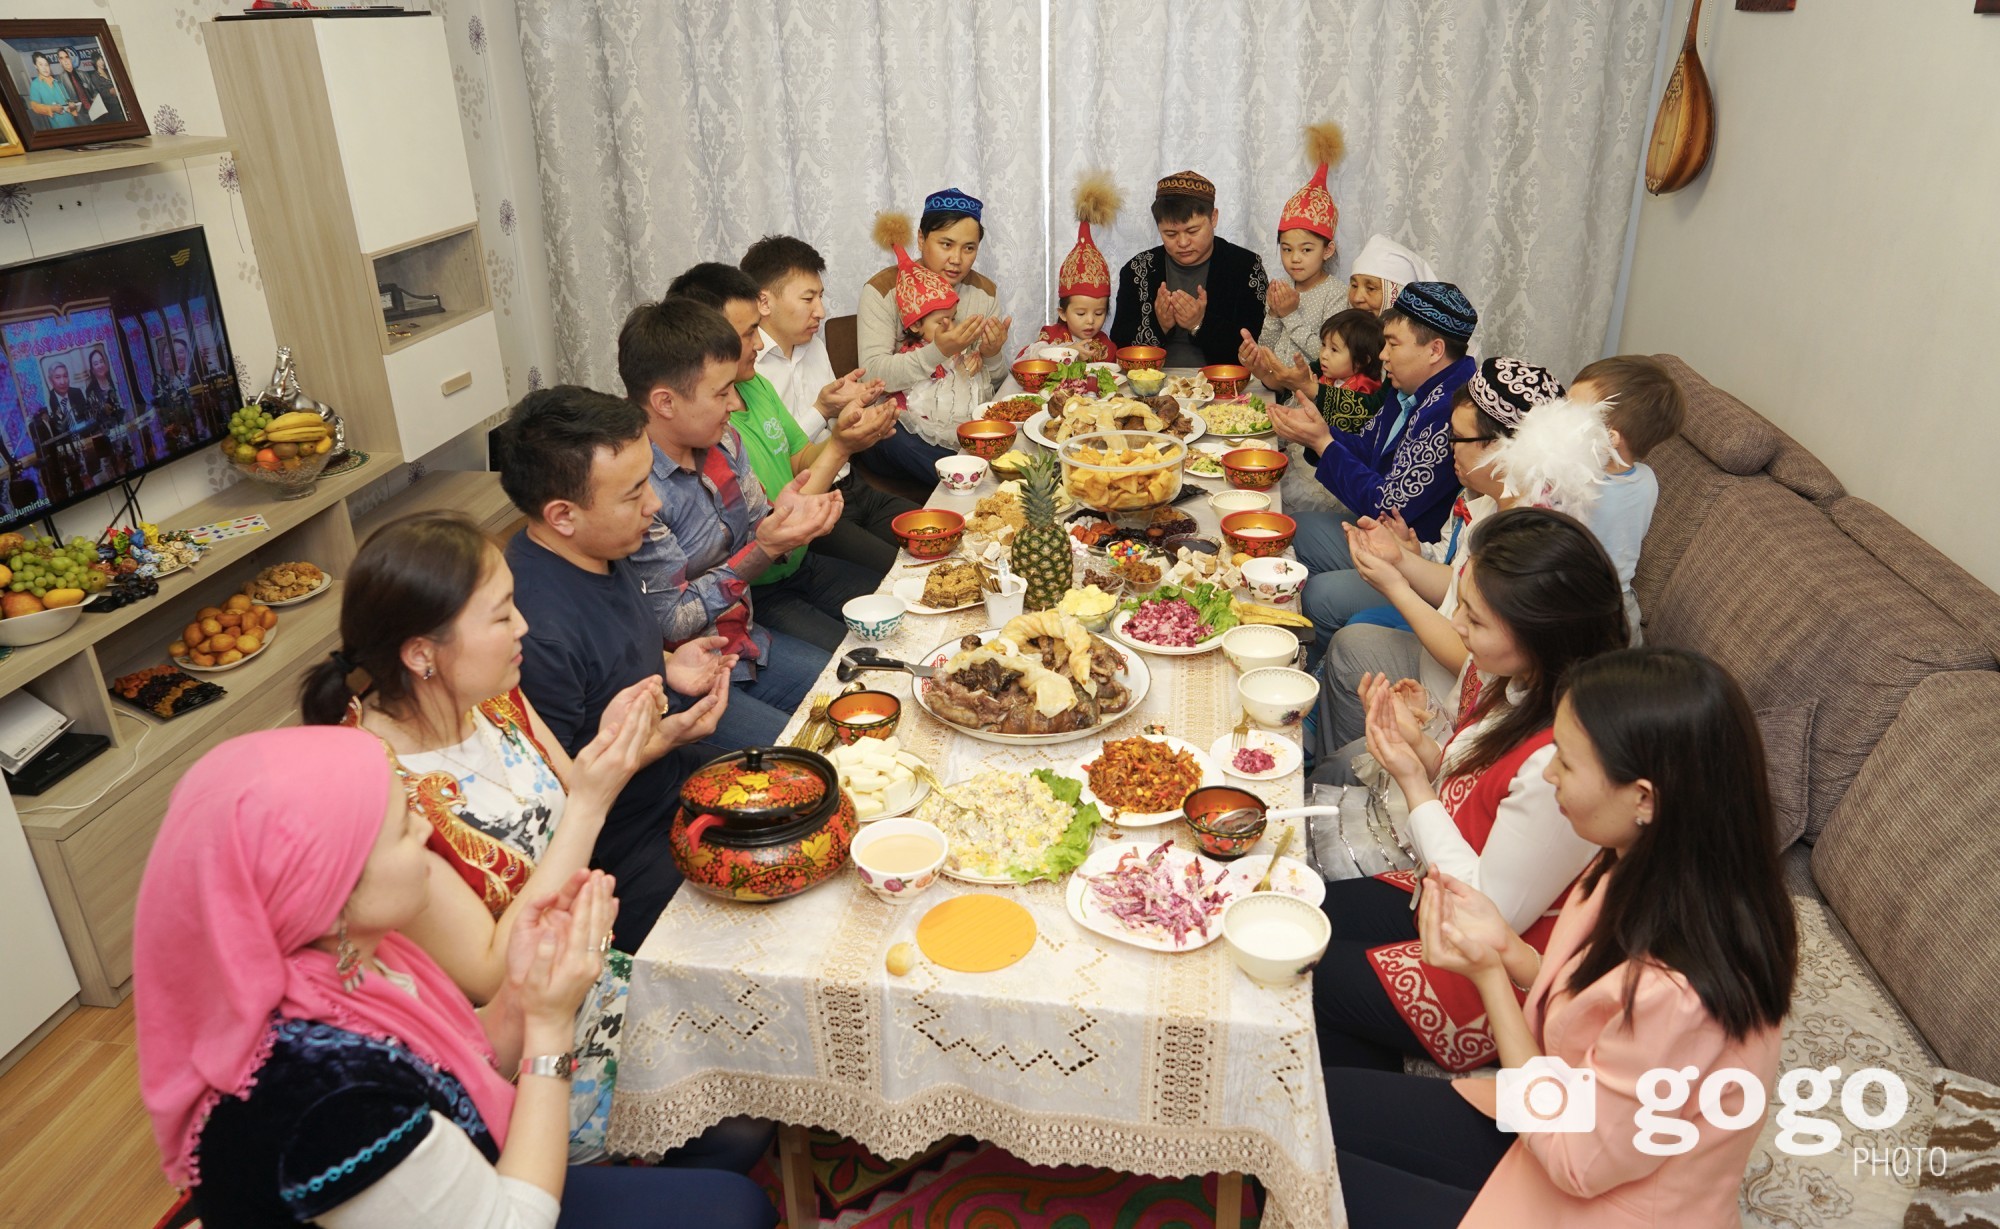 Eldest person of the family must say blessings before eating the dishes. Others must open their hands into their face when listening the blessings. 